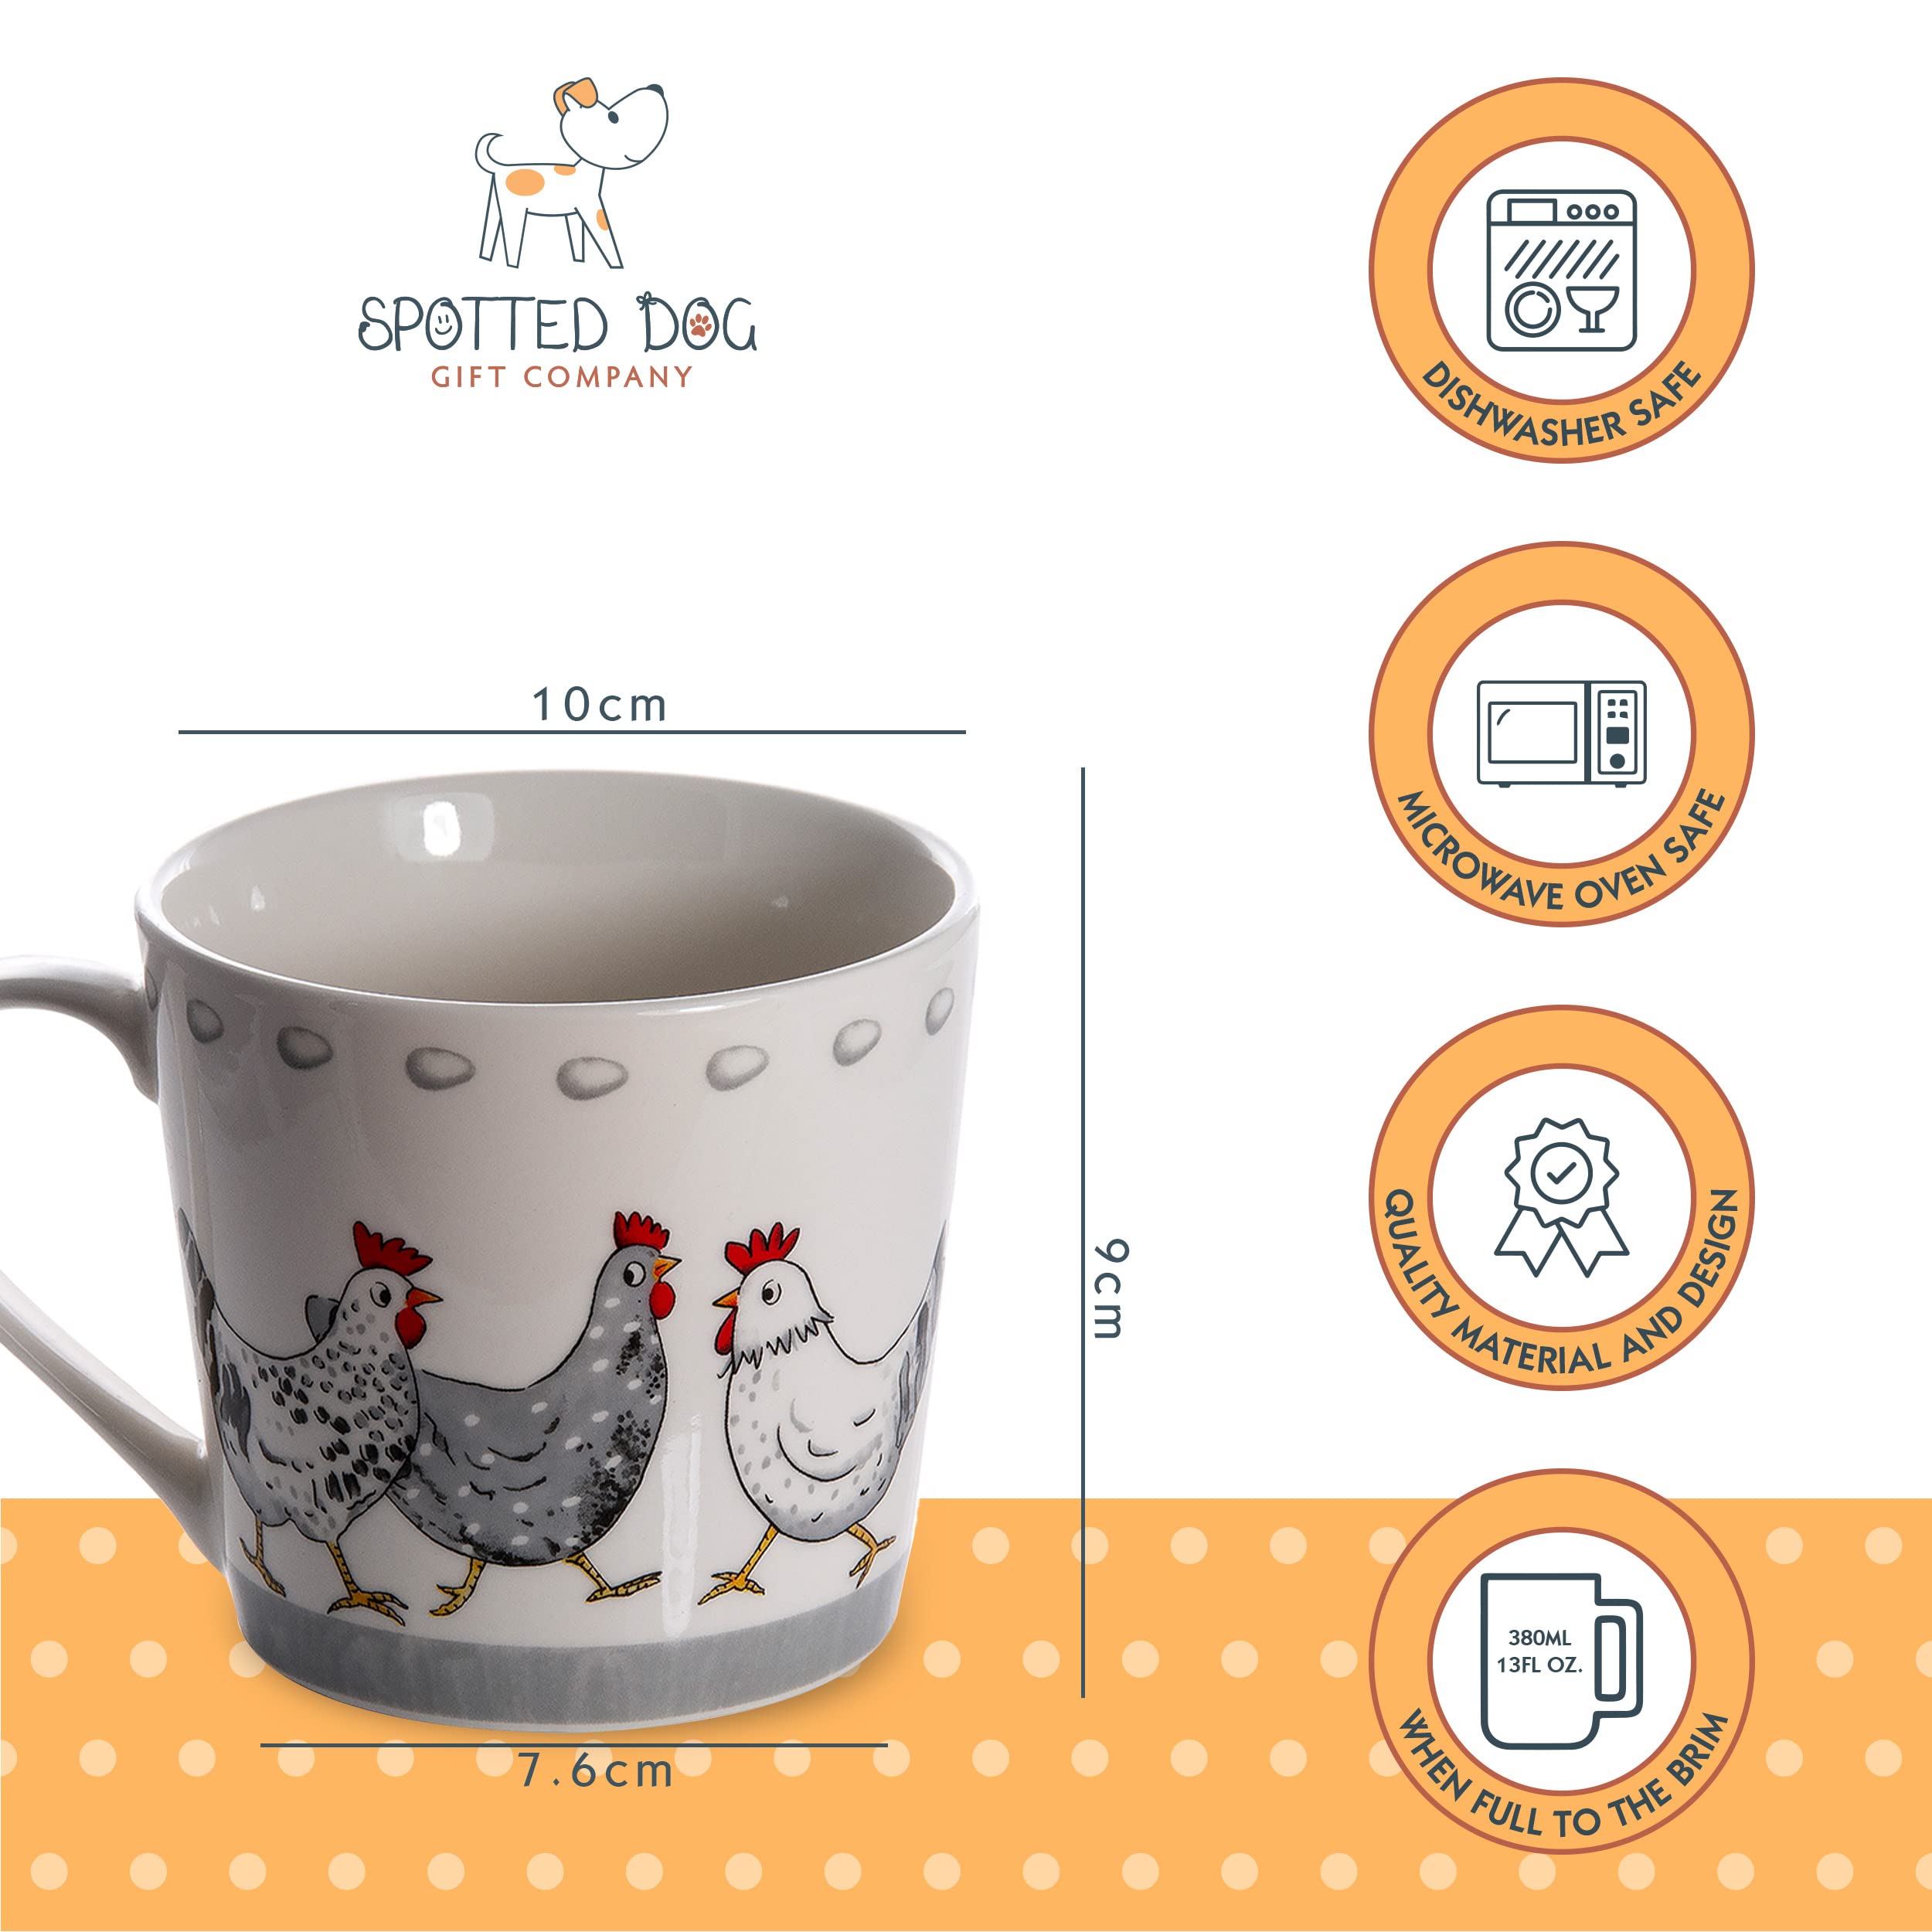 SPOTTED DOG GIFT COMPANY Chicken Coffee Mug Set of 4, Tea Mugs Cups 13oz Ceramic Porcelain China, Chicken Gifts for Chicken Lovers Women Men